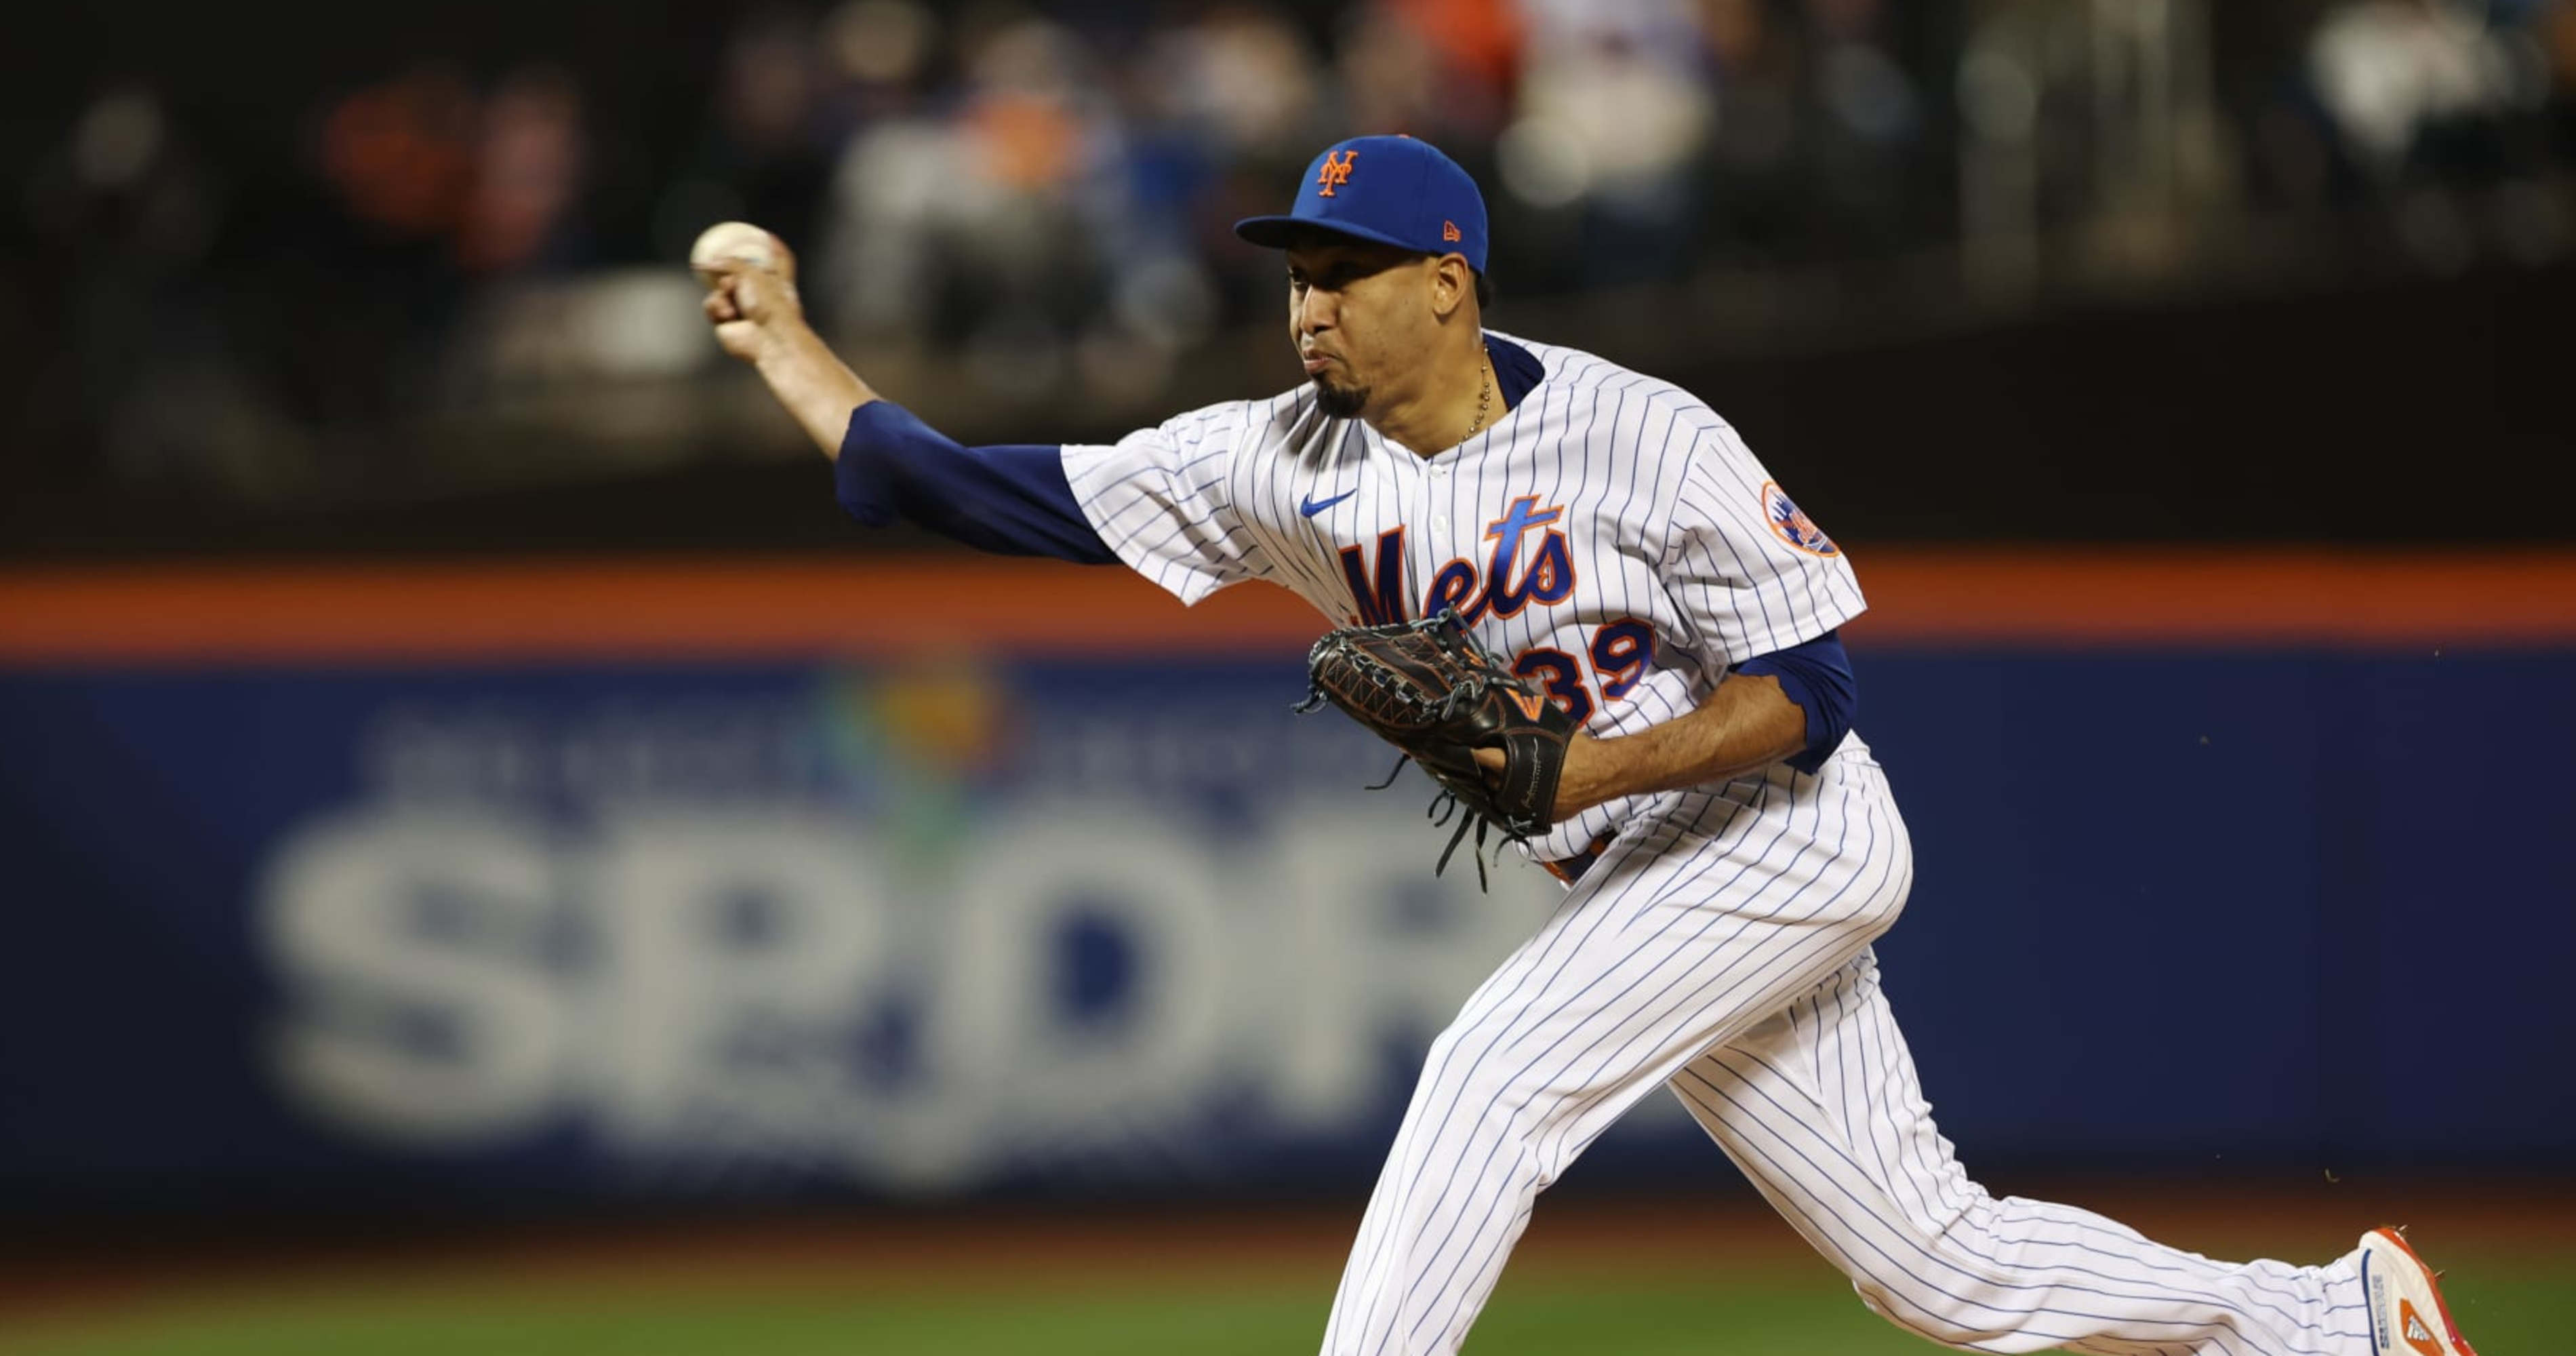 Mets' Edwin Díaz won't return from knee injury this season - The Athletic